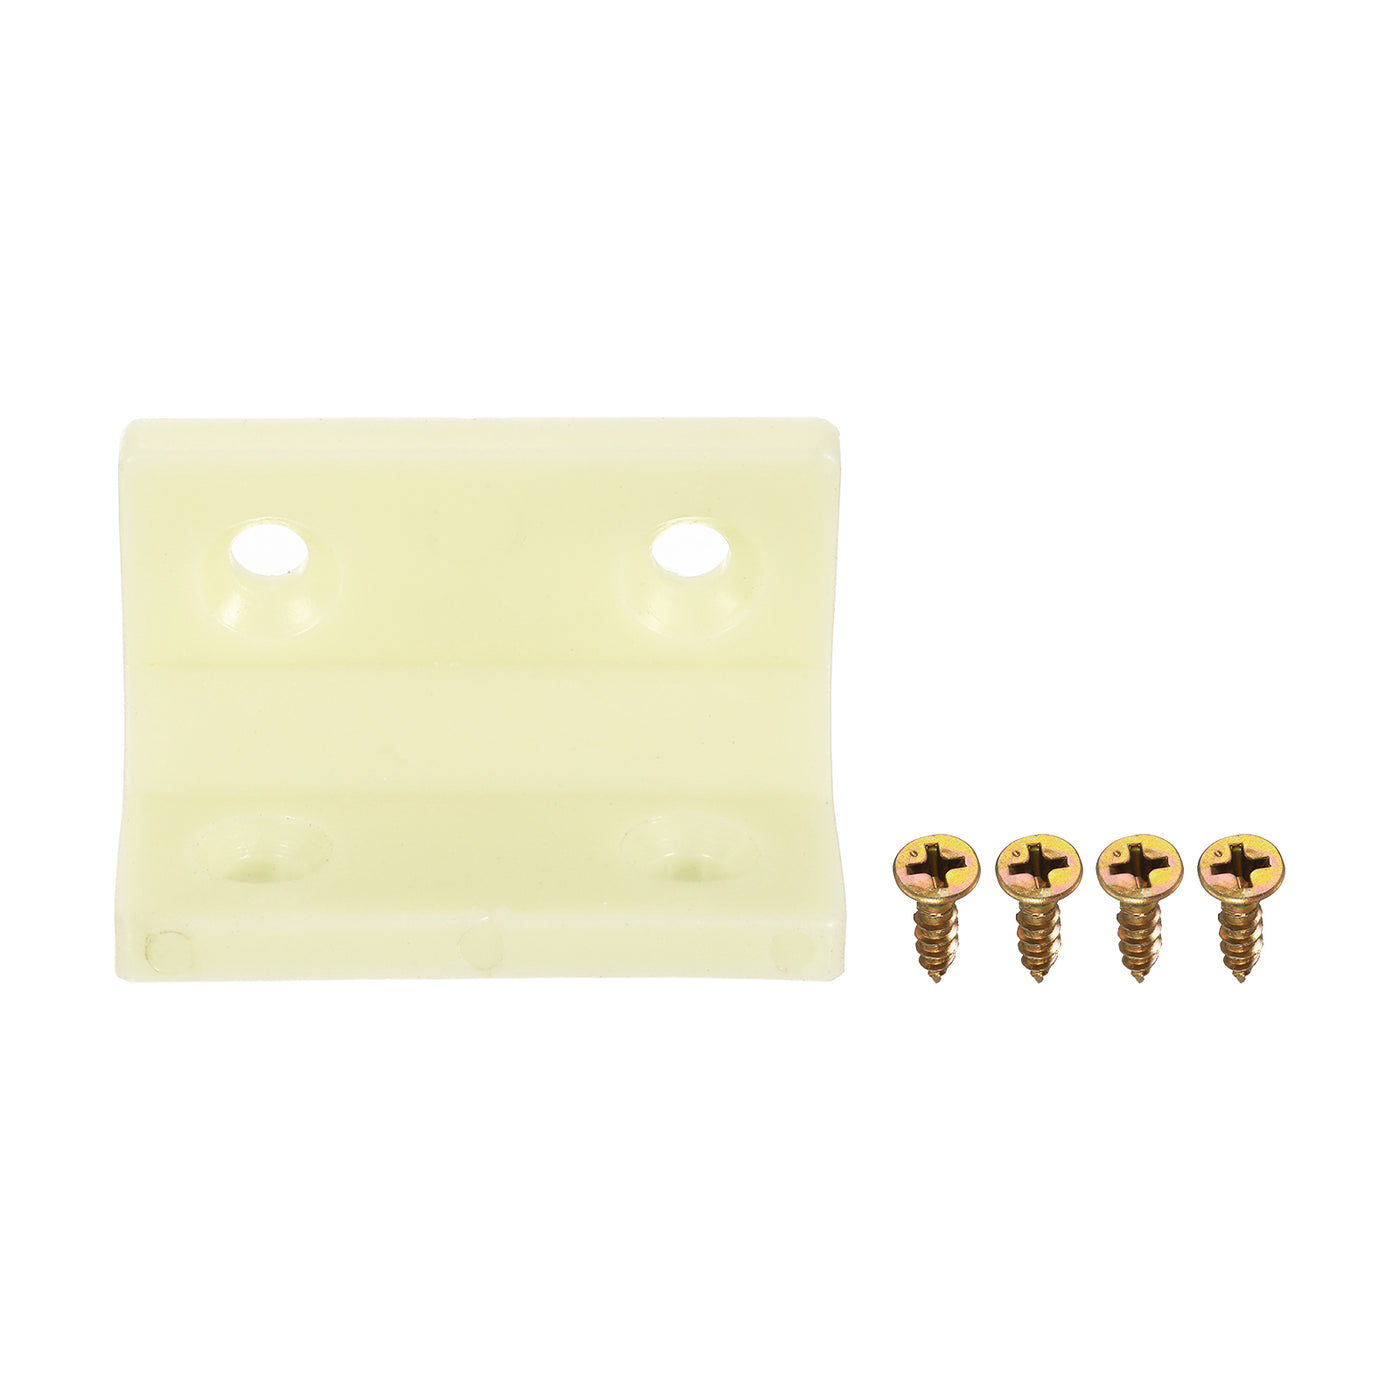 uxcell Uxcell 50Pcs 90 Degree Plastic Corner Braces, 38x22x22mm Nylon Shelf Right Angle Brackets with Screws for Cabinets, Cupboards (Beige Yellow)